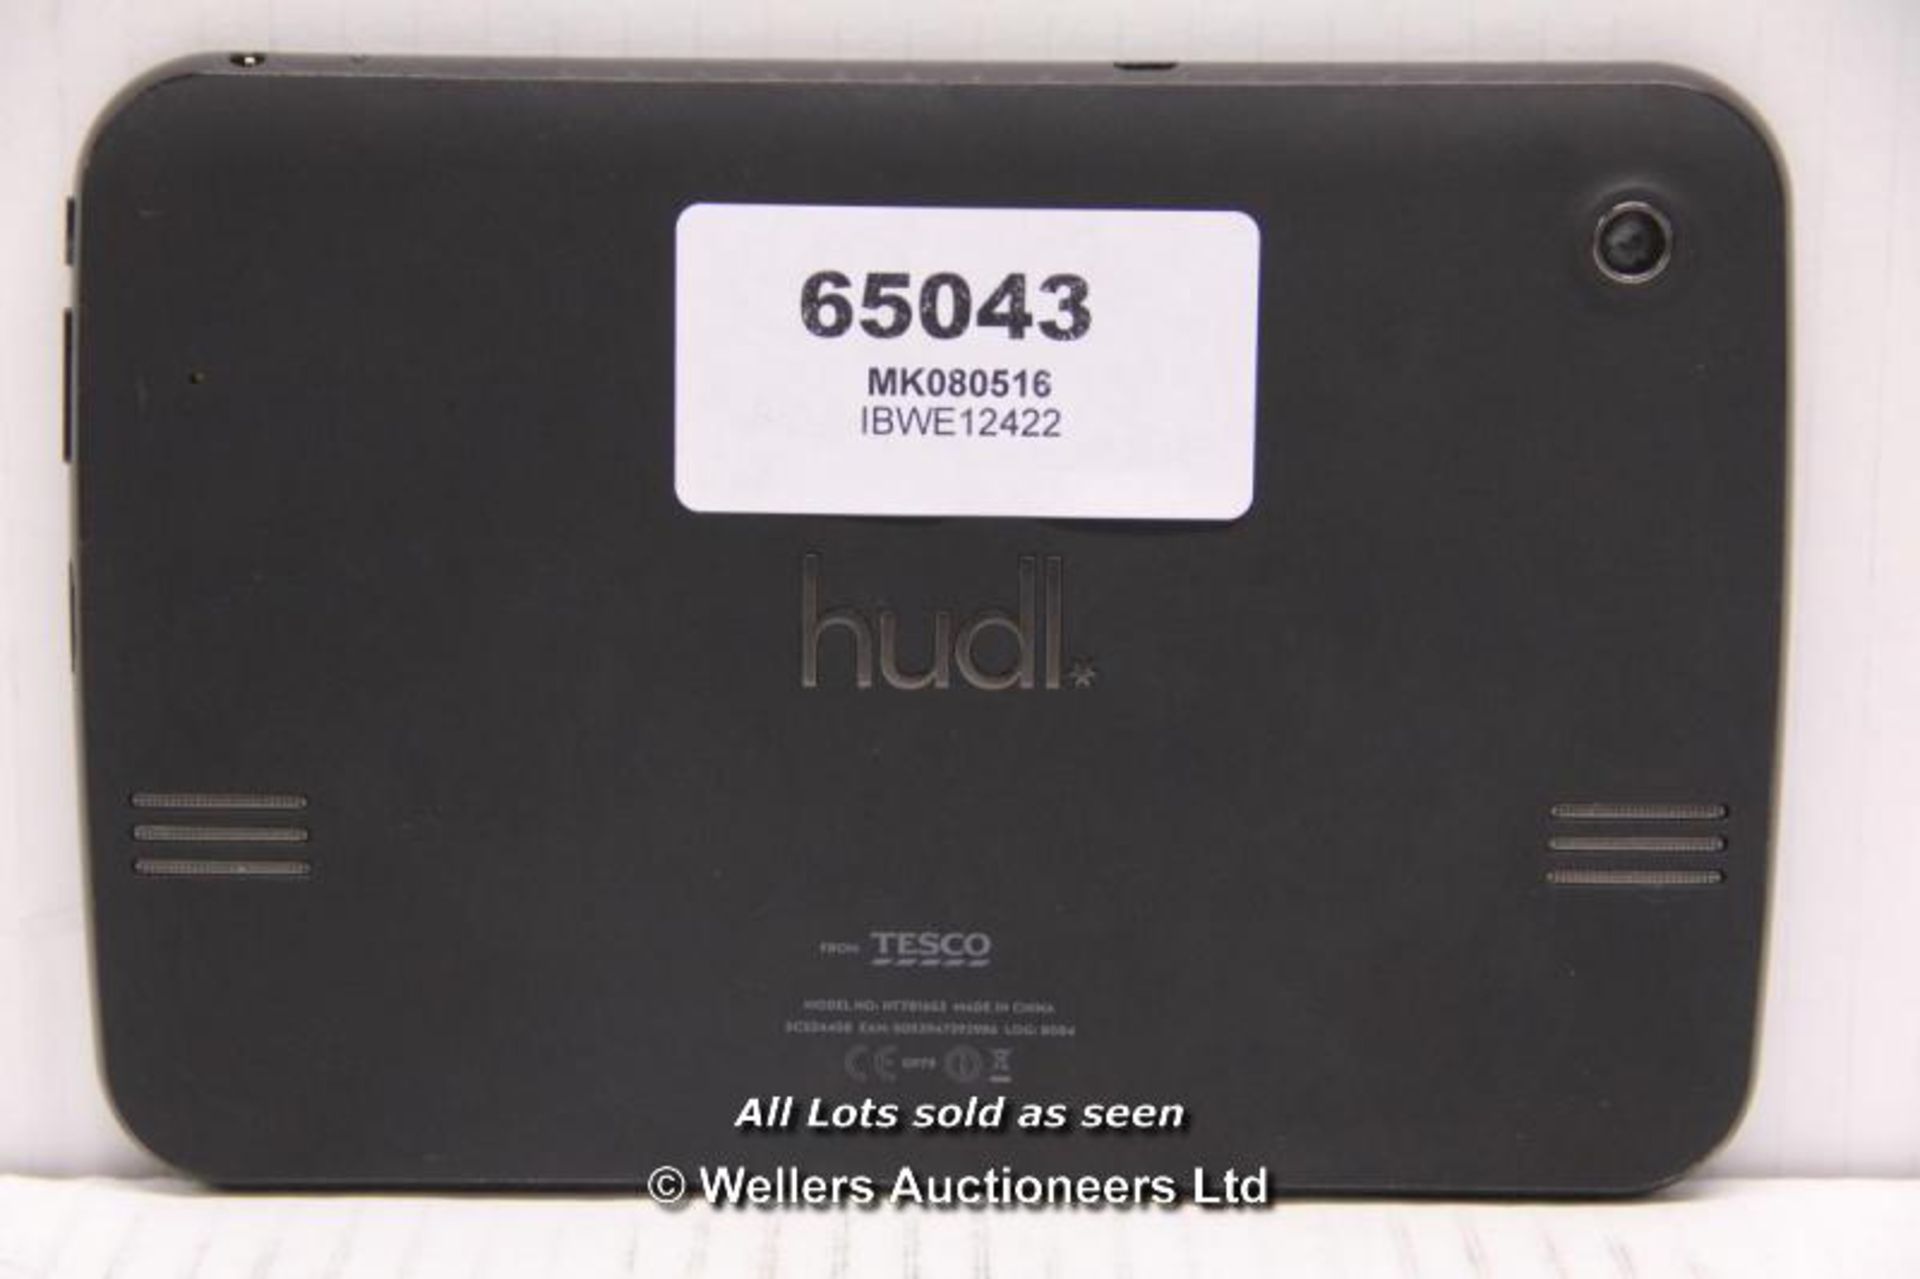 TESCO HUDLE HT7S3 TABLET / POWERS ON WITH ANDROID / NO CHARGER OR CABLE / COSMETICALLY MARKED / - Image 3 of 3